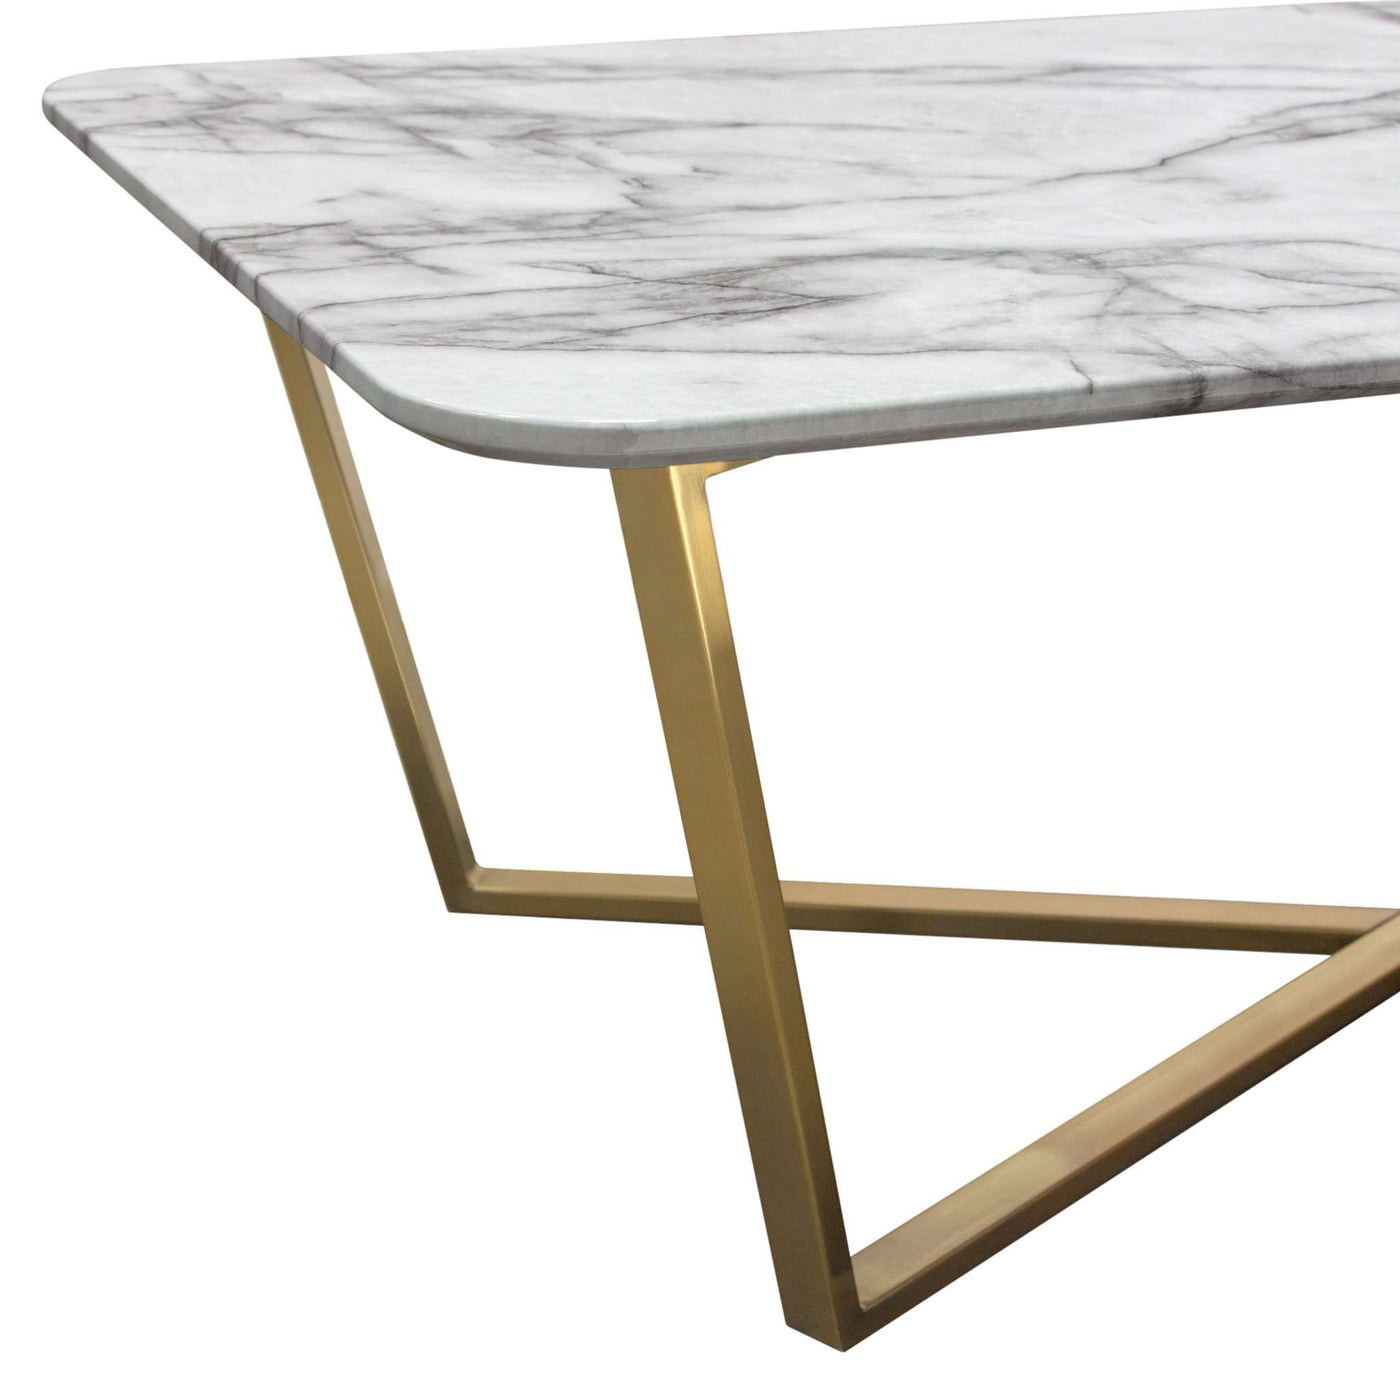 Vida 35" Round Cocktail Table w/ Faux Marble Top and Brushed Gold Metal Frame by Diamond Sofa